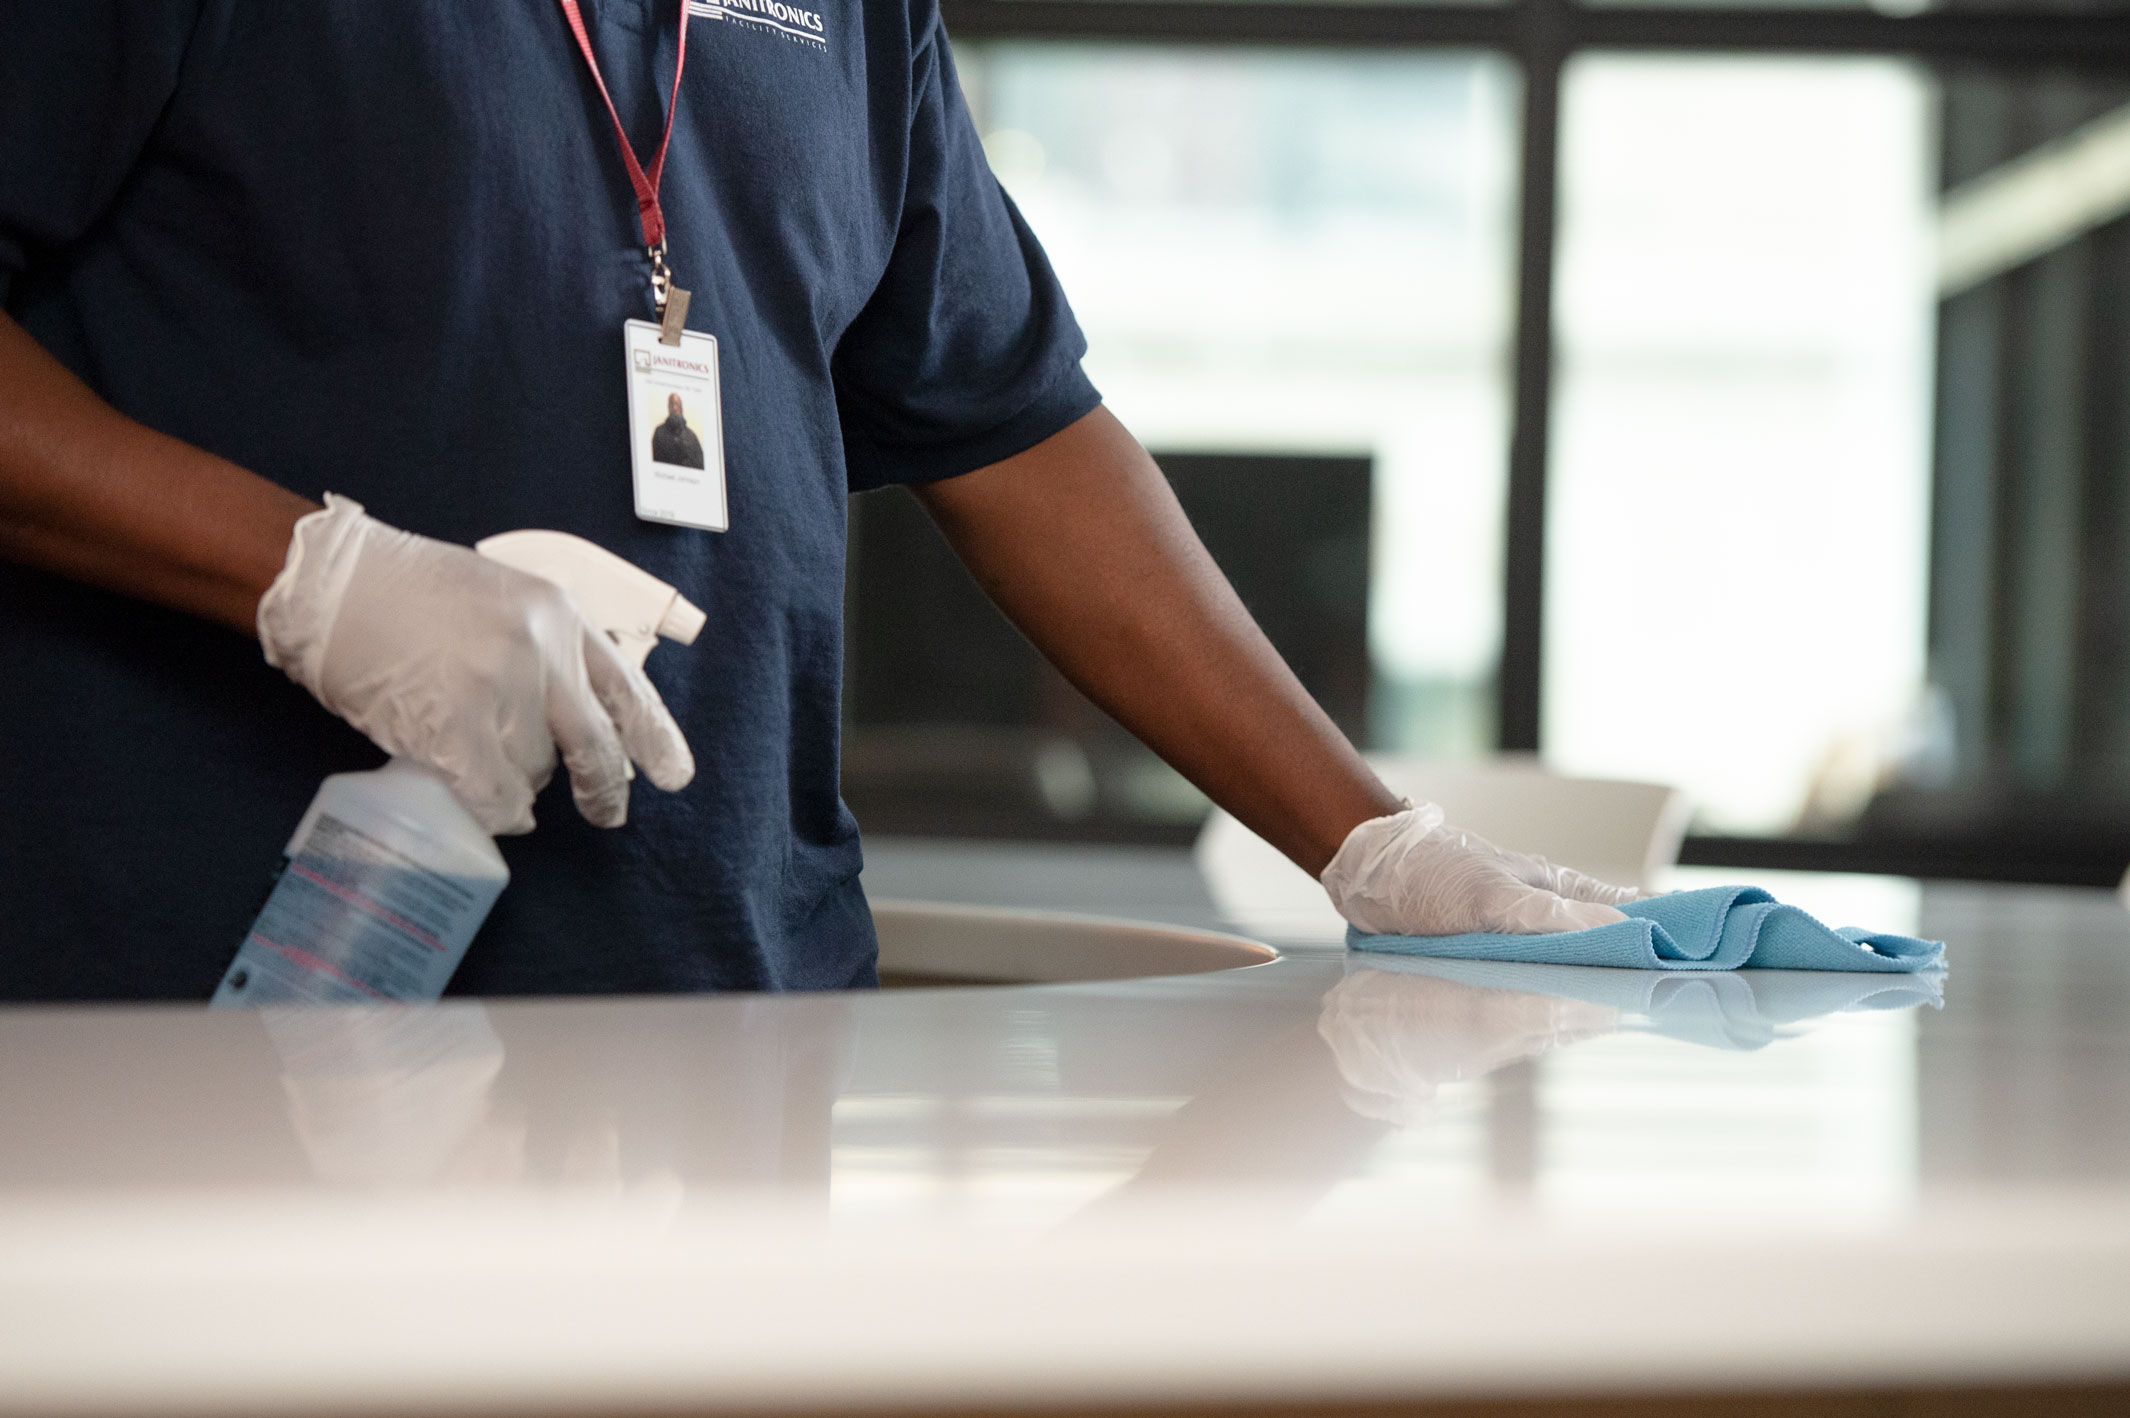 Janitronics technician wiping down counter with blue microfiber cloth